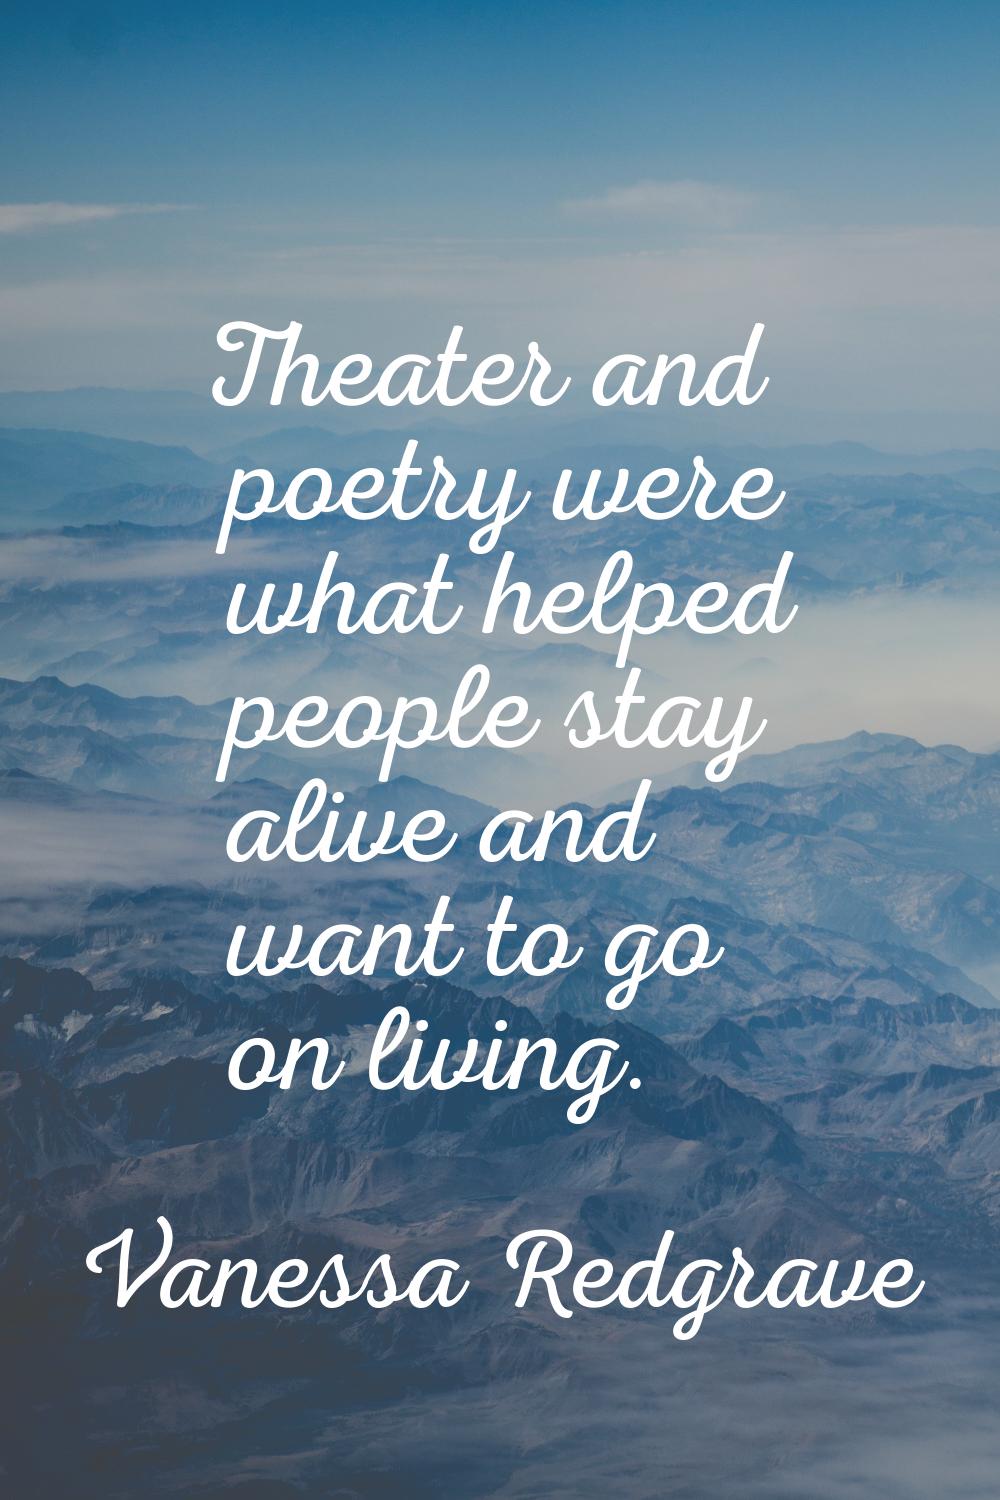 Theater and poetry were what helped people stay alive and want to go on living.